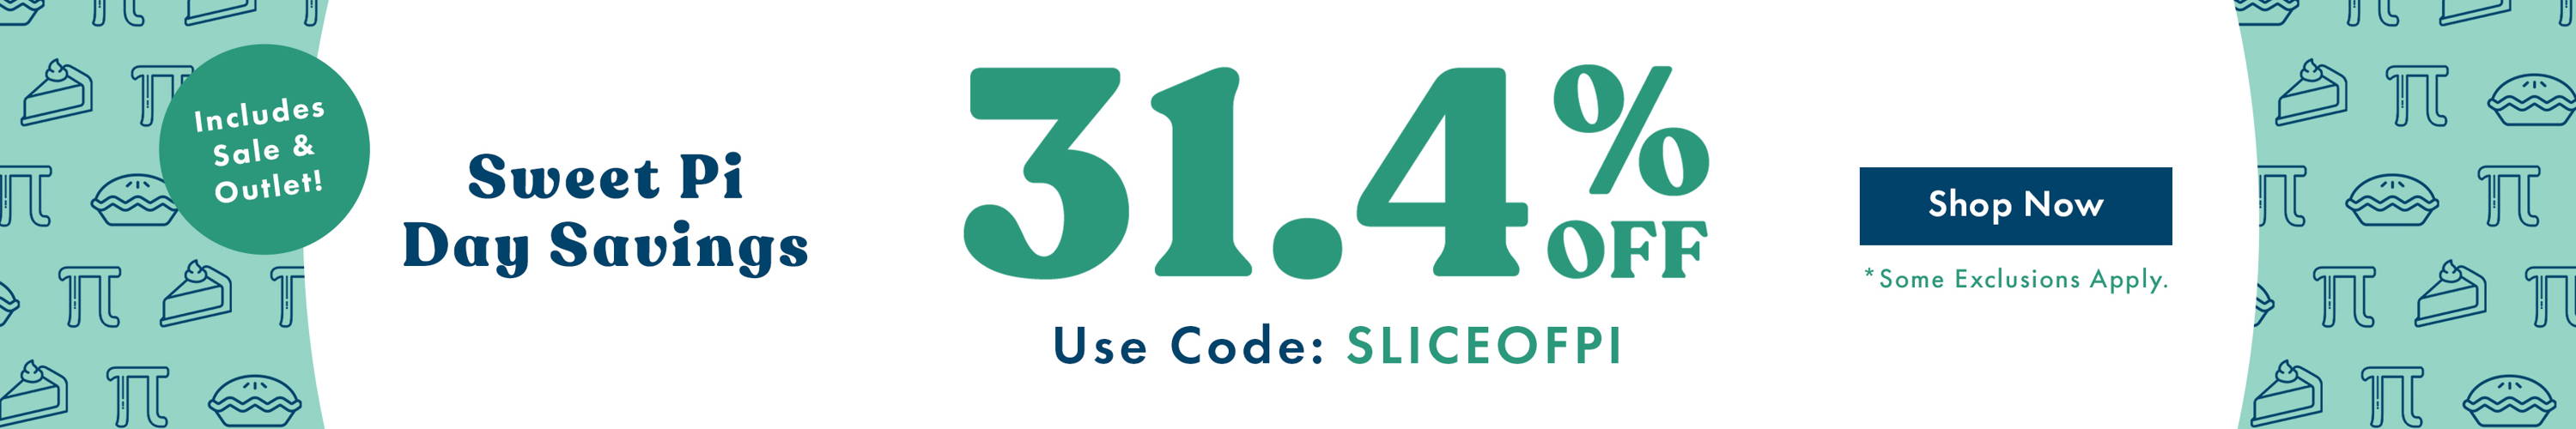 Pi Day Sale: 31.4% Off Almost Everything - Use Code SLICEOFPI